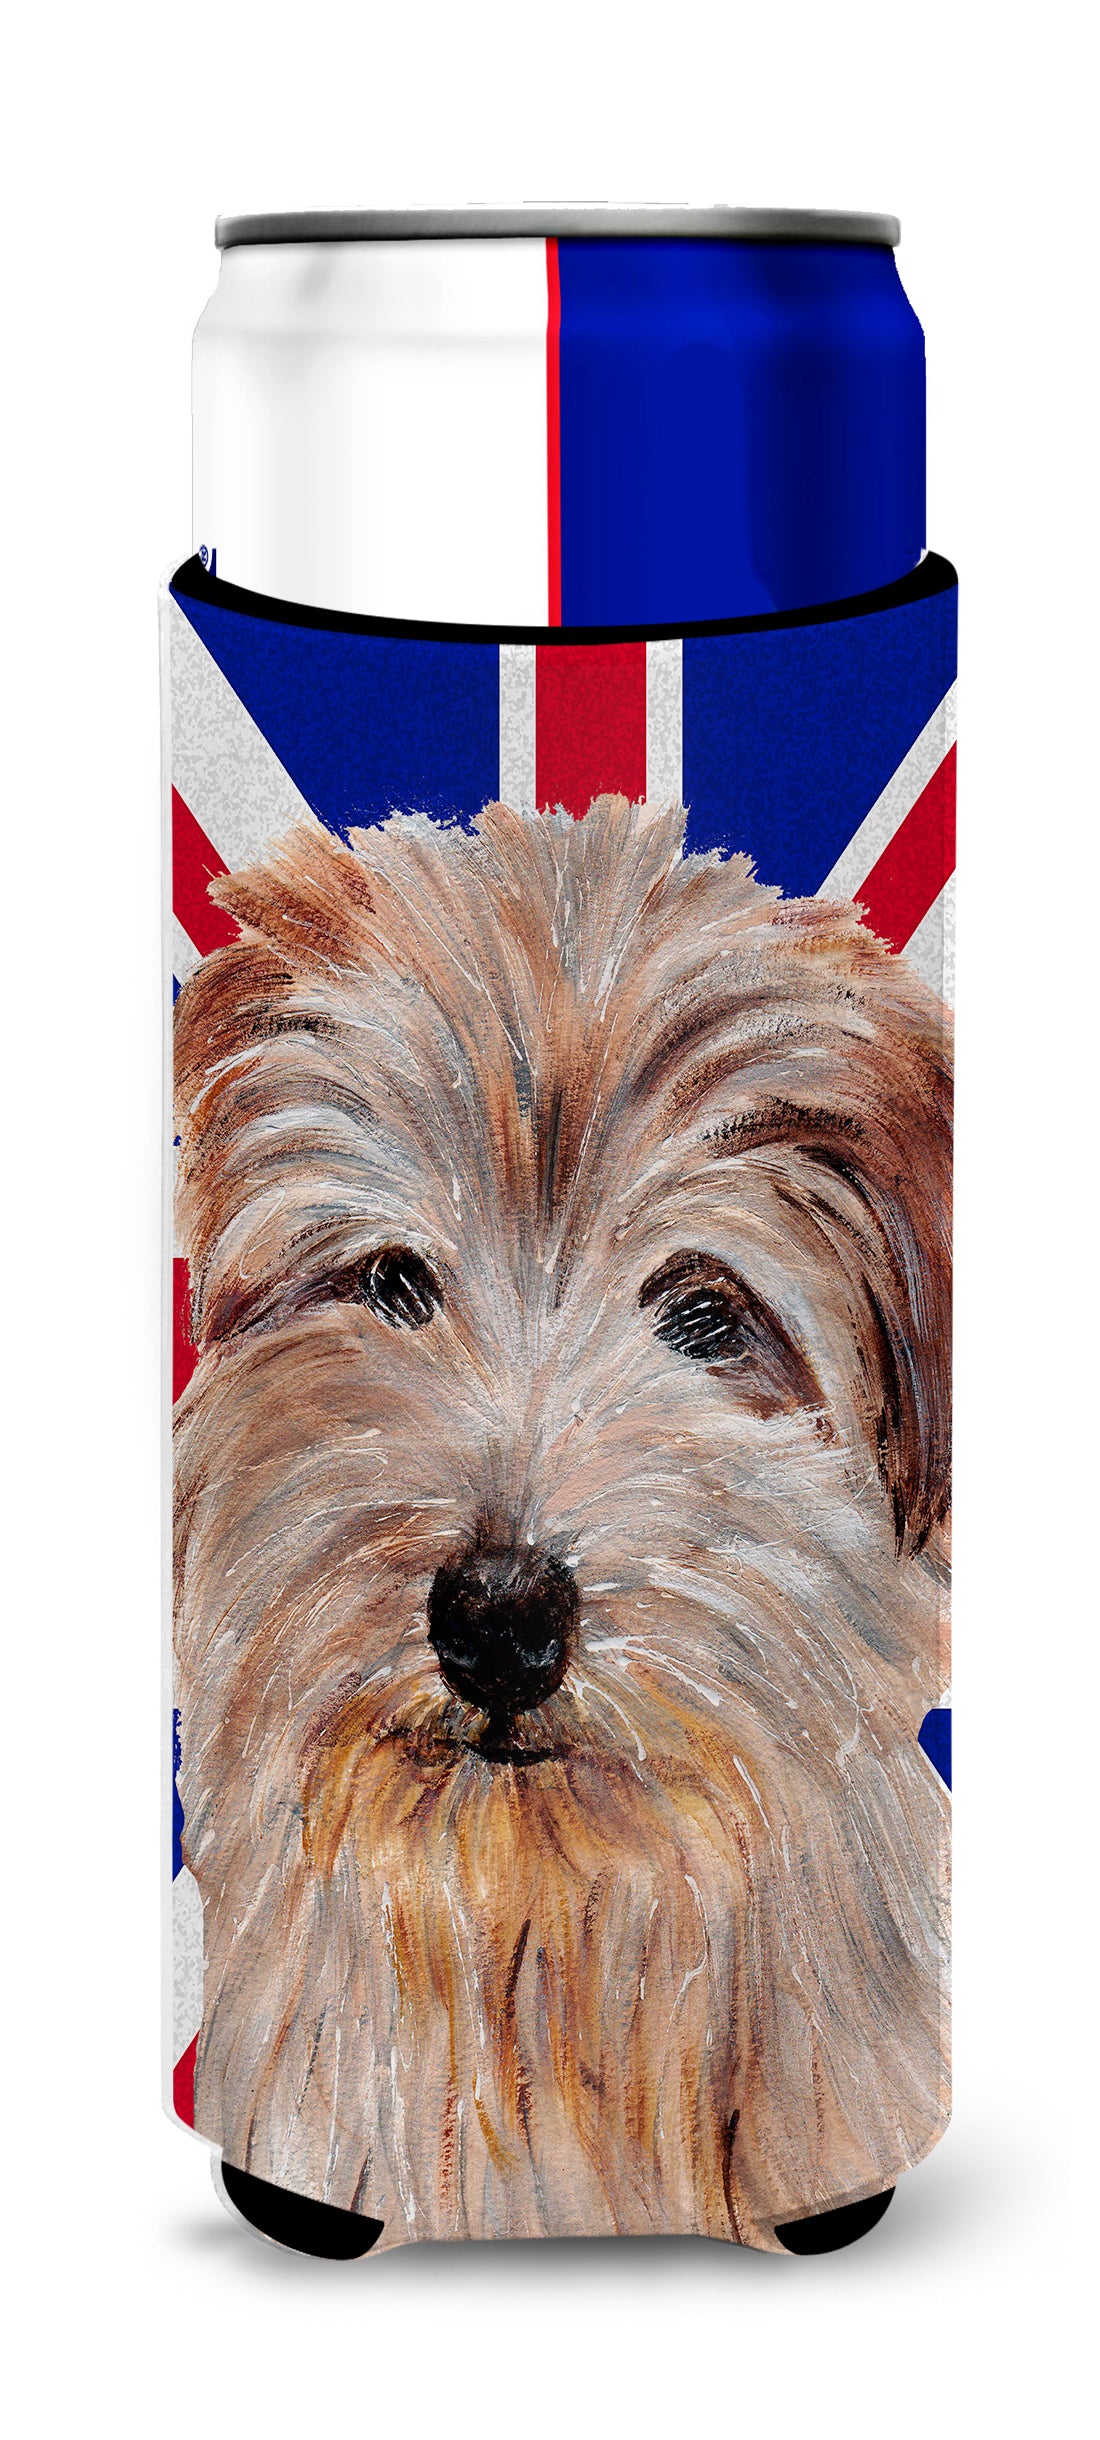 Norfolk Terrier with English Union Jack British Flag Ultra Beverage Insulators for slim cans SC9875MUK.